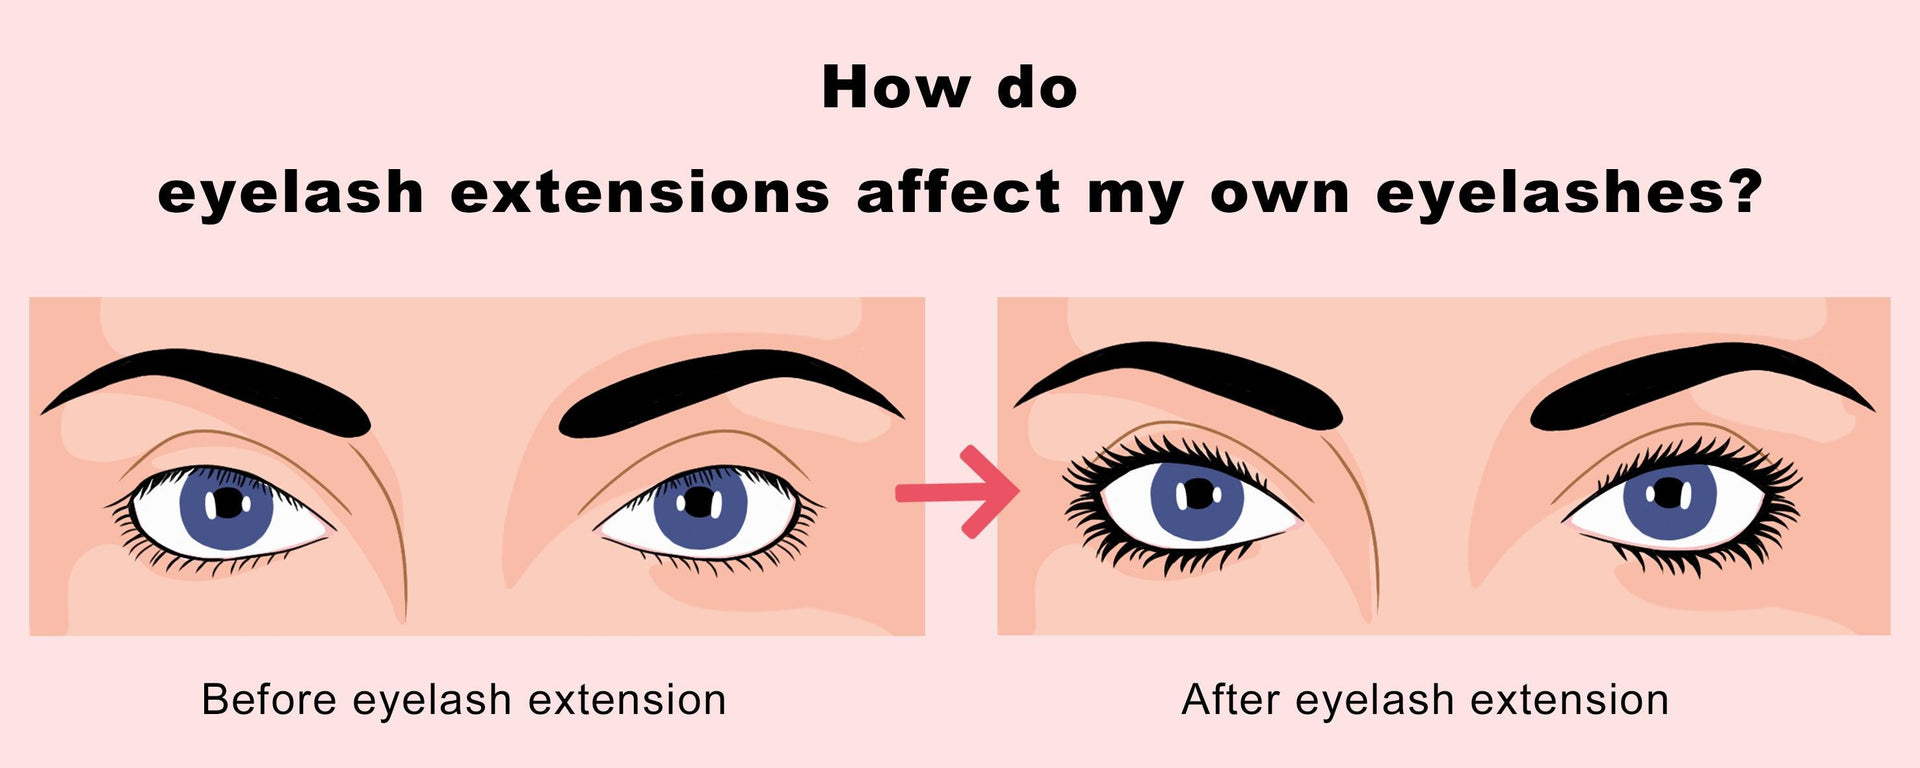 How do eyelash extensions affect my own eyelashes?